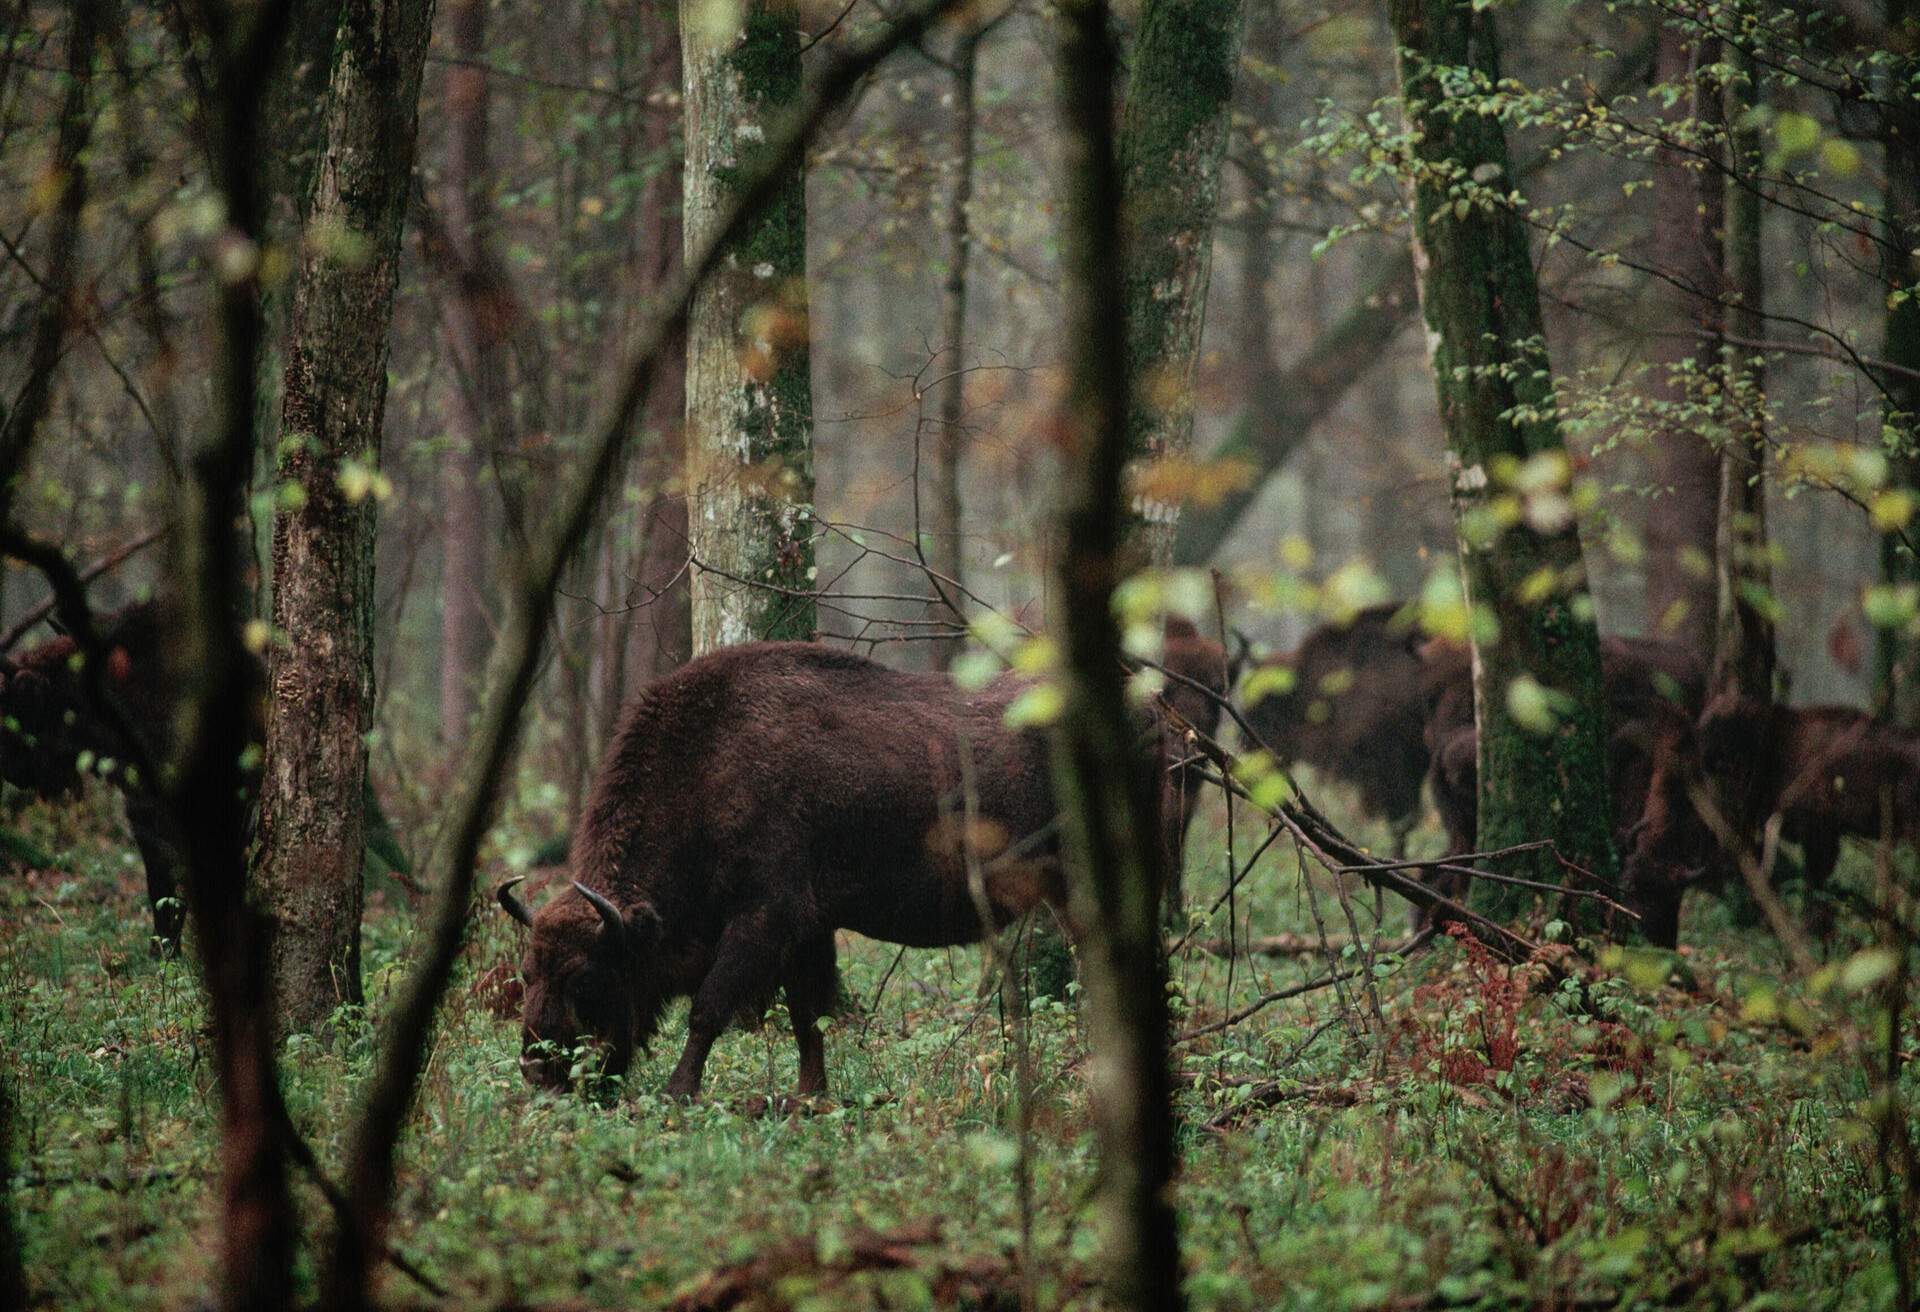 European bison from a small protected herd roam the Bialowieza Forest of eastern Poland